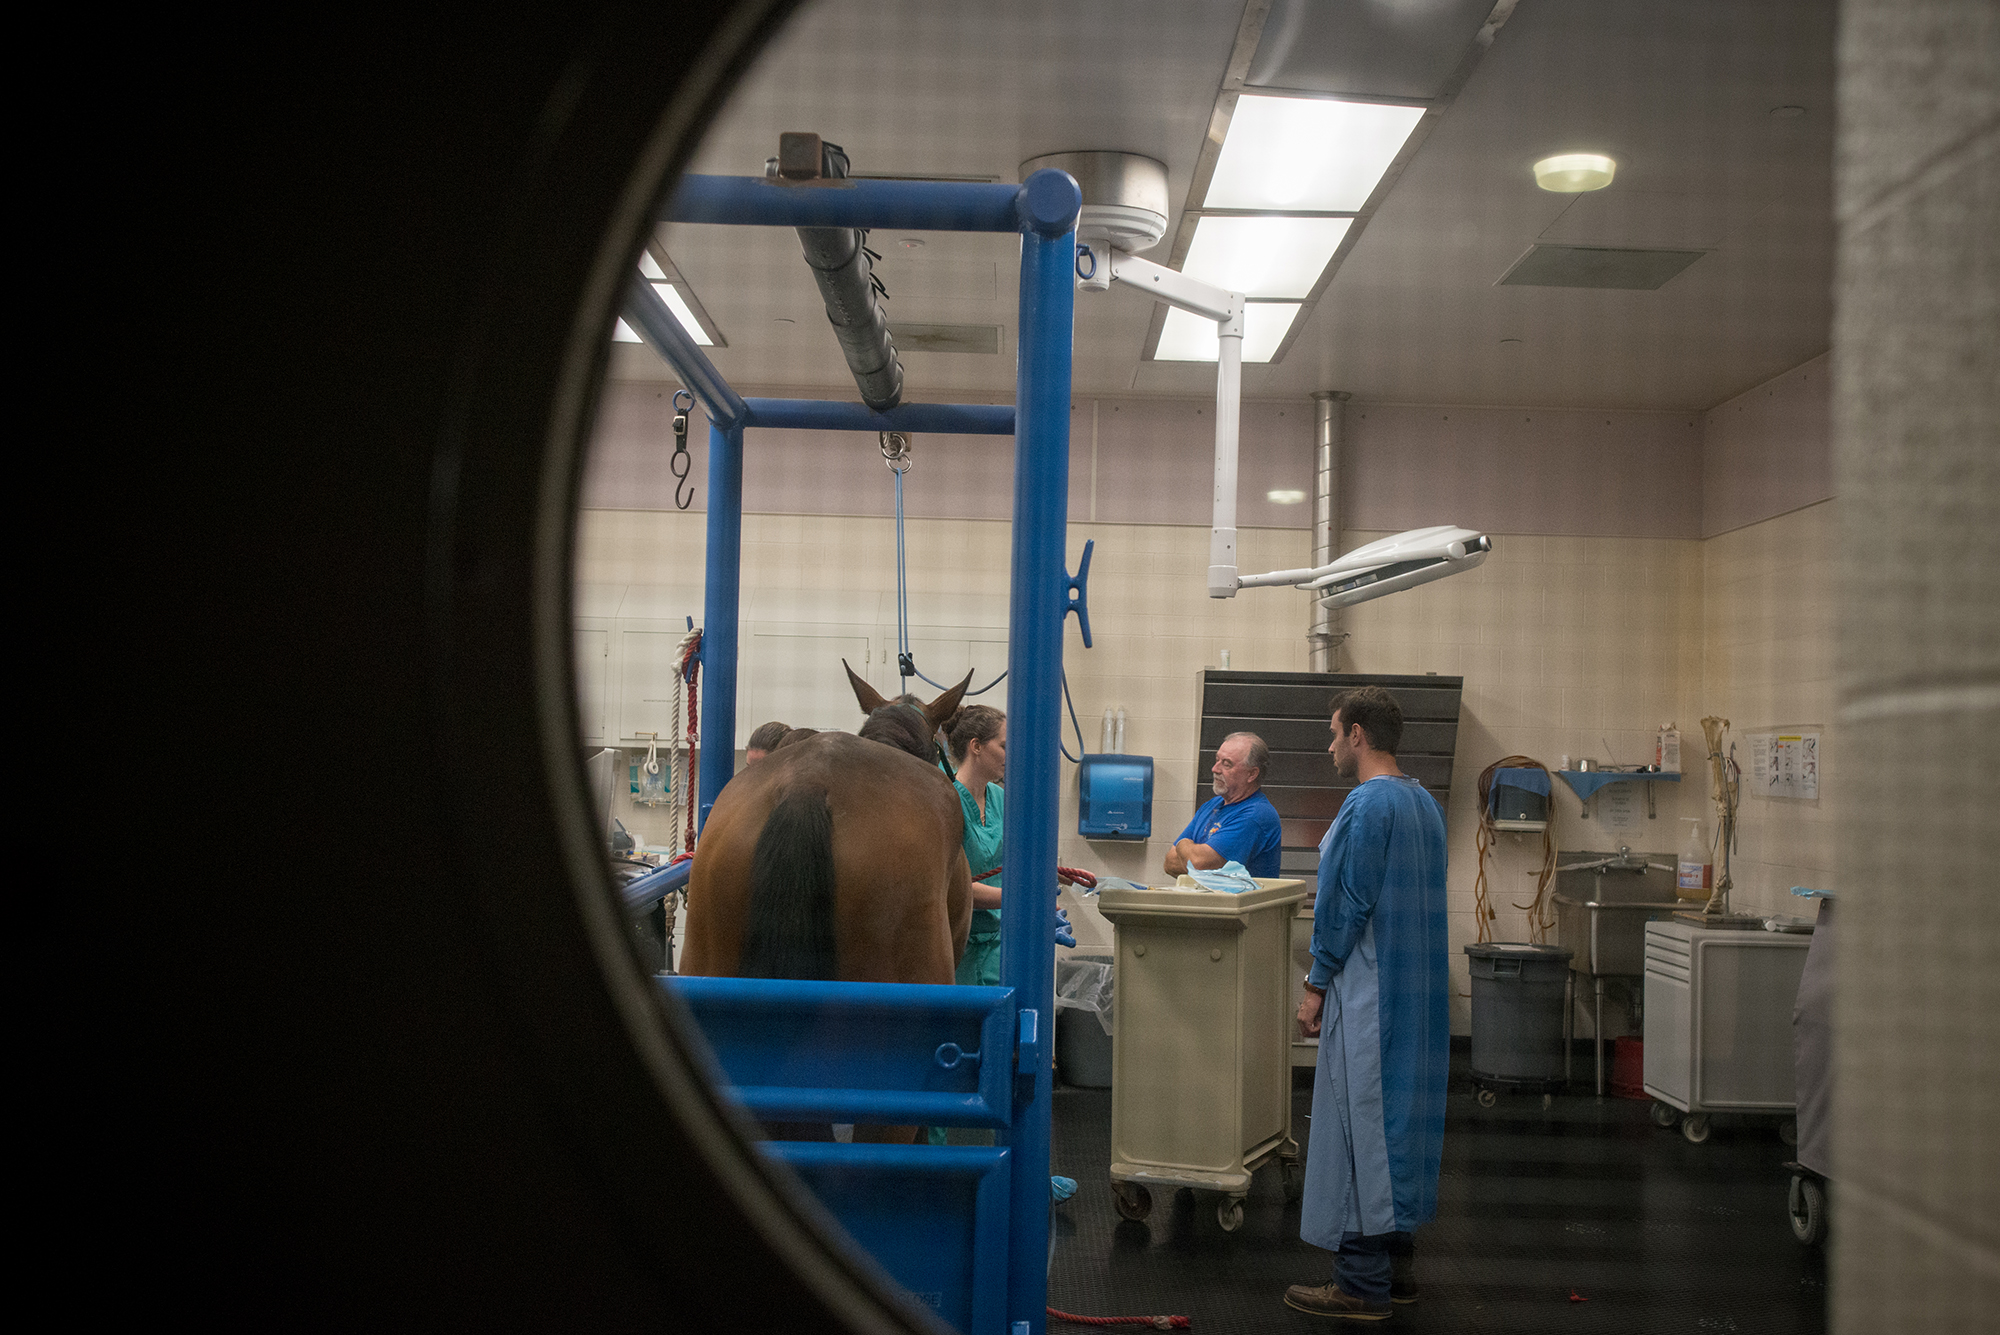 LVTs in an operating theater with a horse.